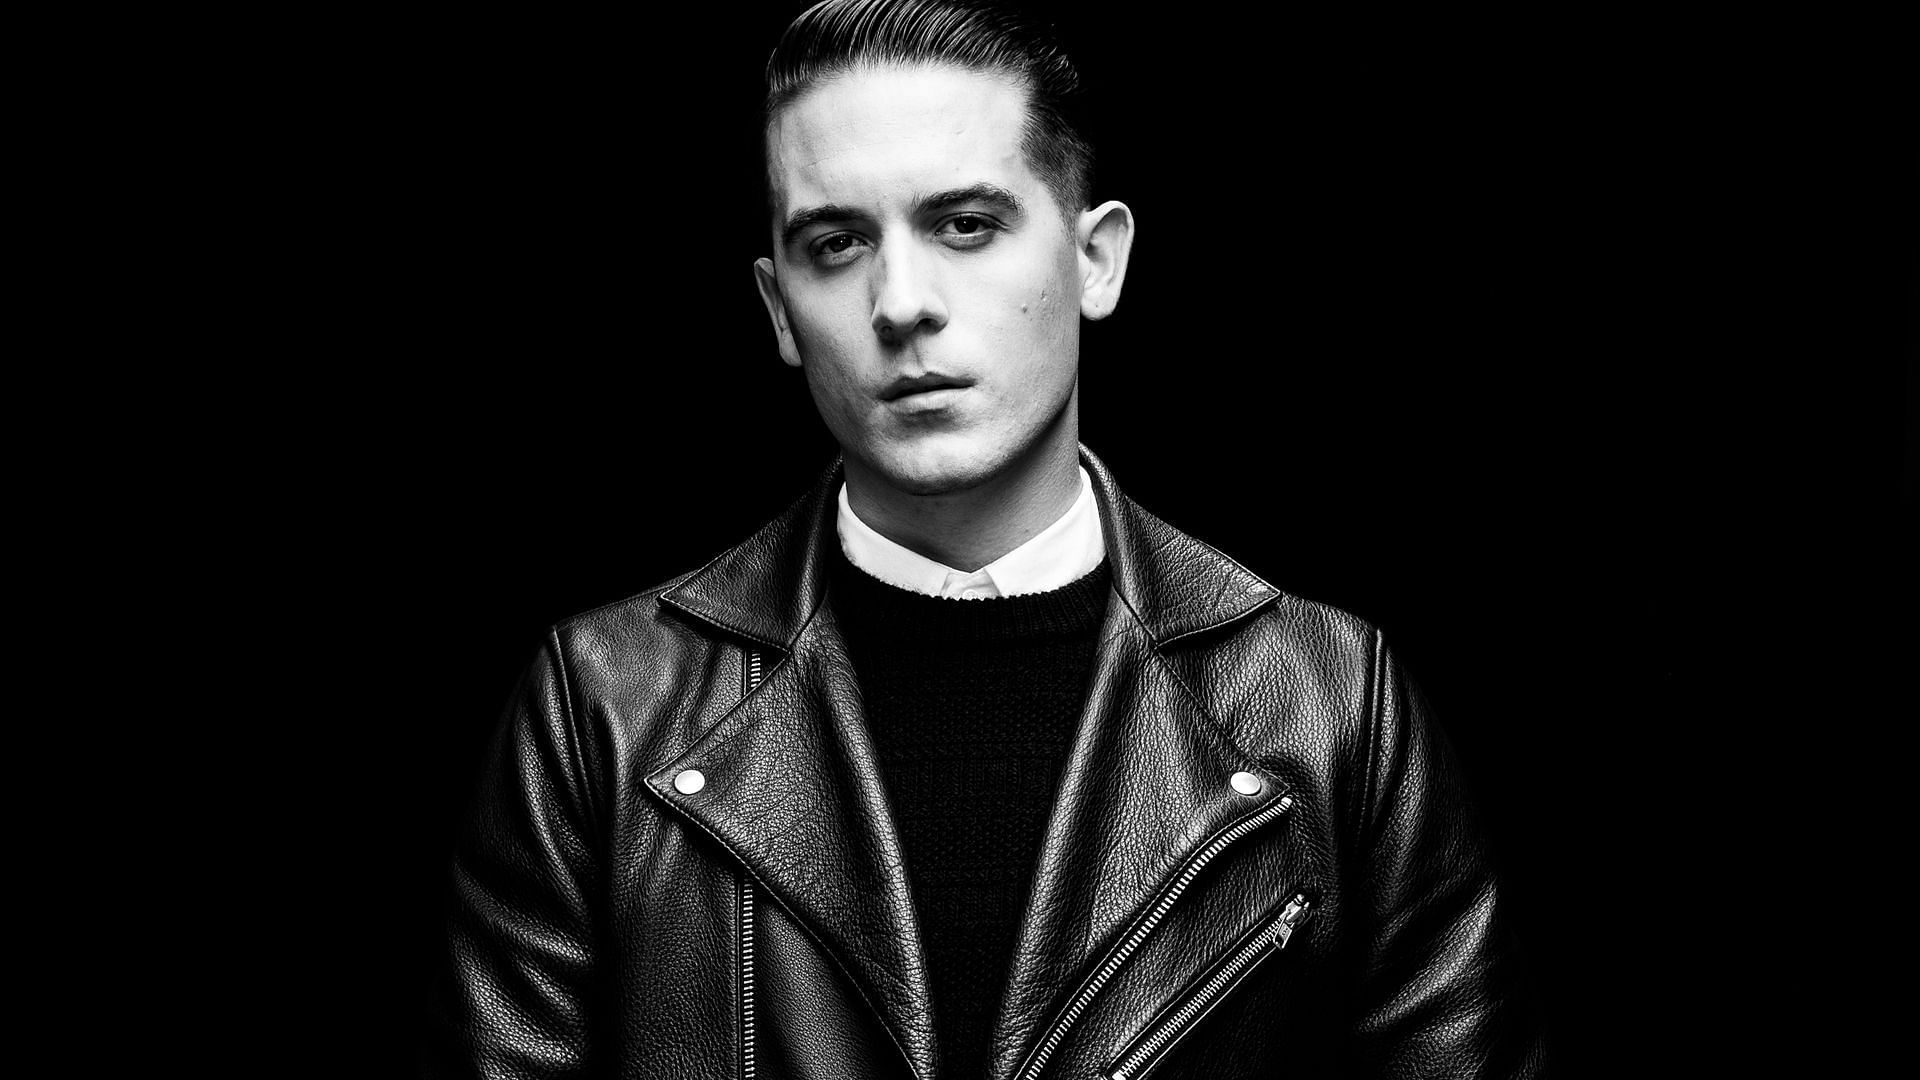 Rapper G-Eazy has been assigned to three Manhattan Justice Opportunities sessions following disorderly conduct plea deal (Image via Getty Images)